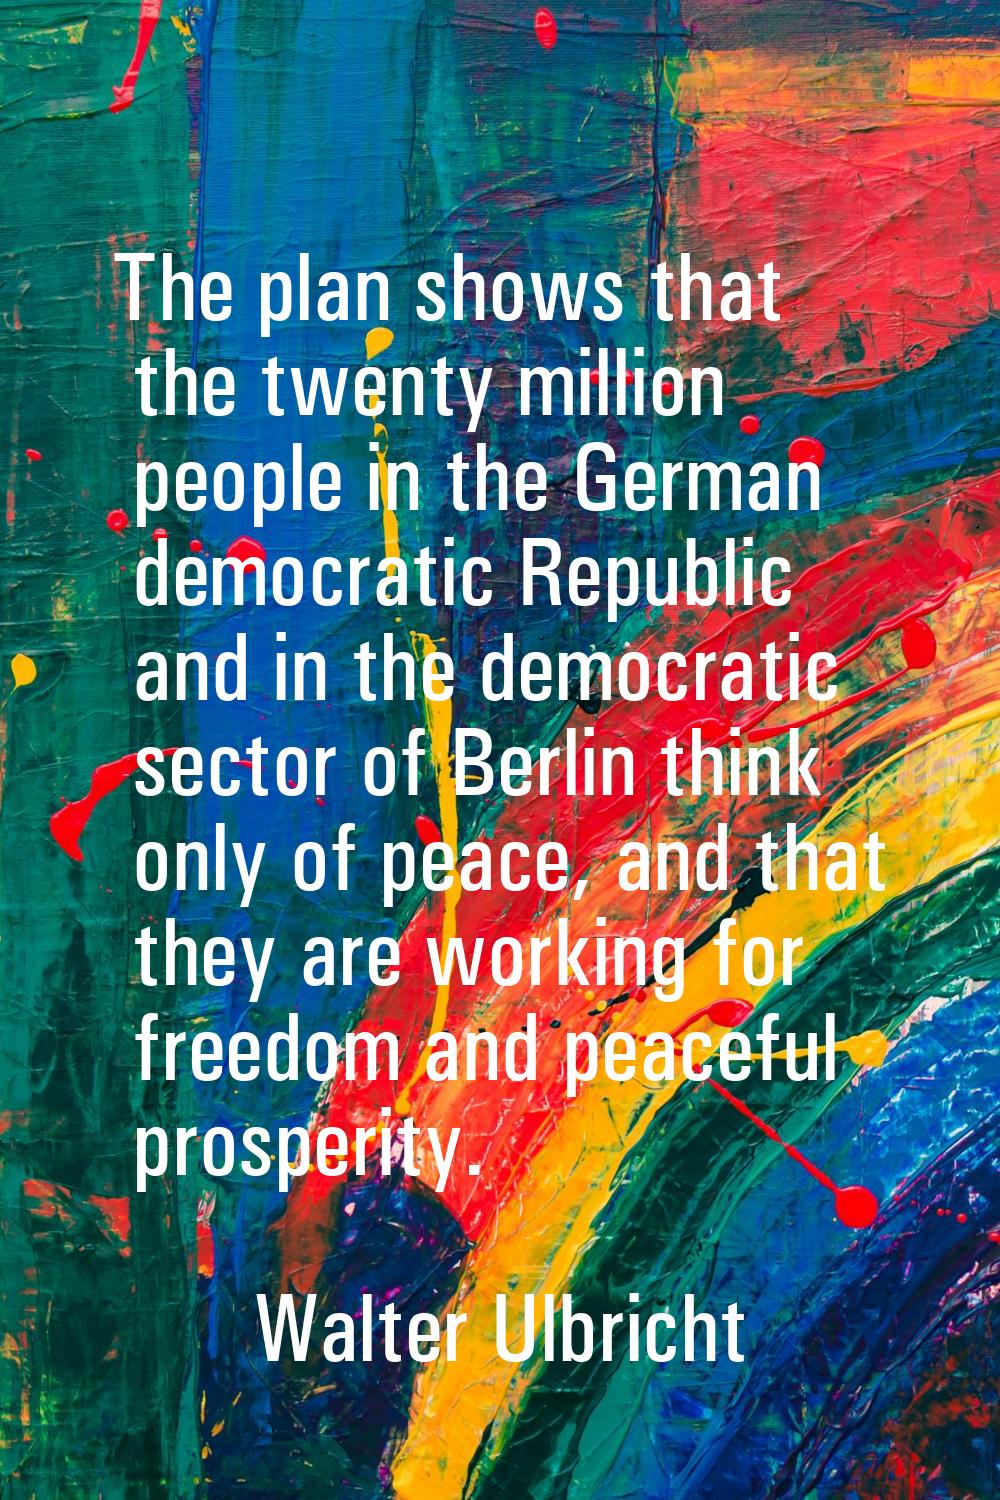 The plan shows that the twenty million people in the German democratic Republic and in the democrat